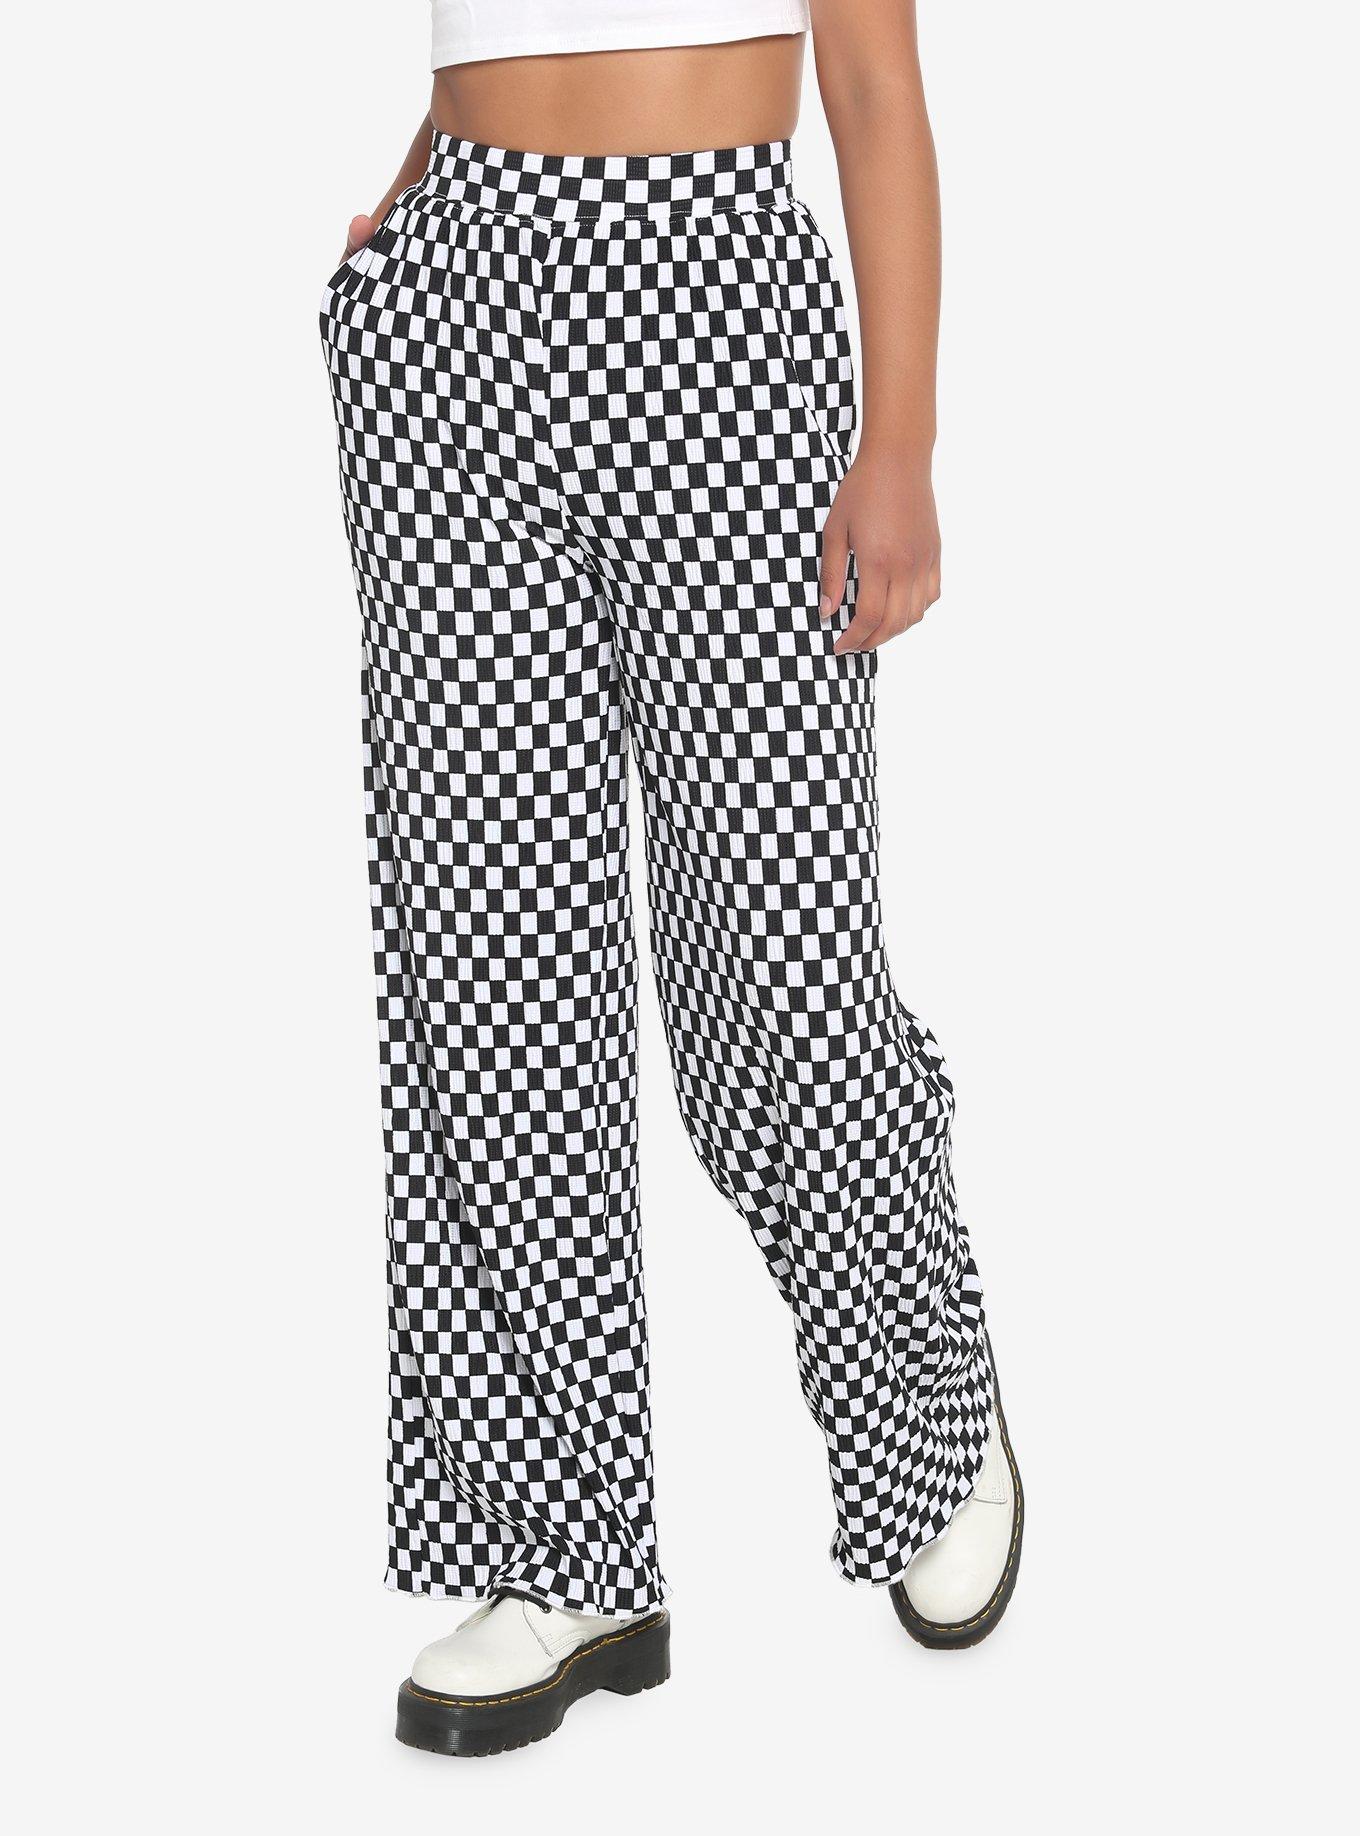 Black And White Checkered Pattern Pants